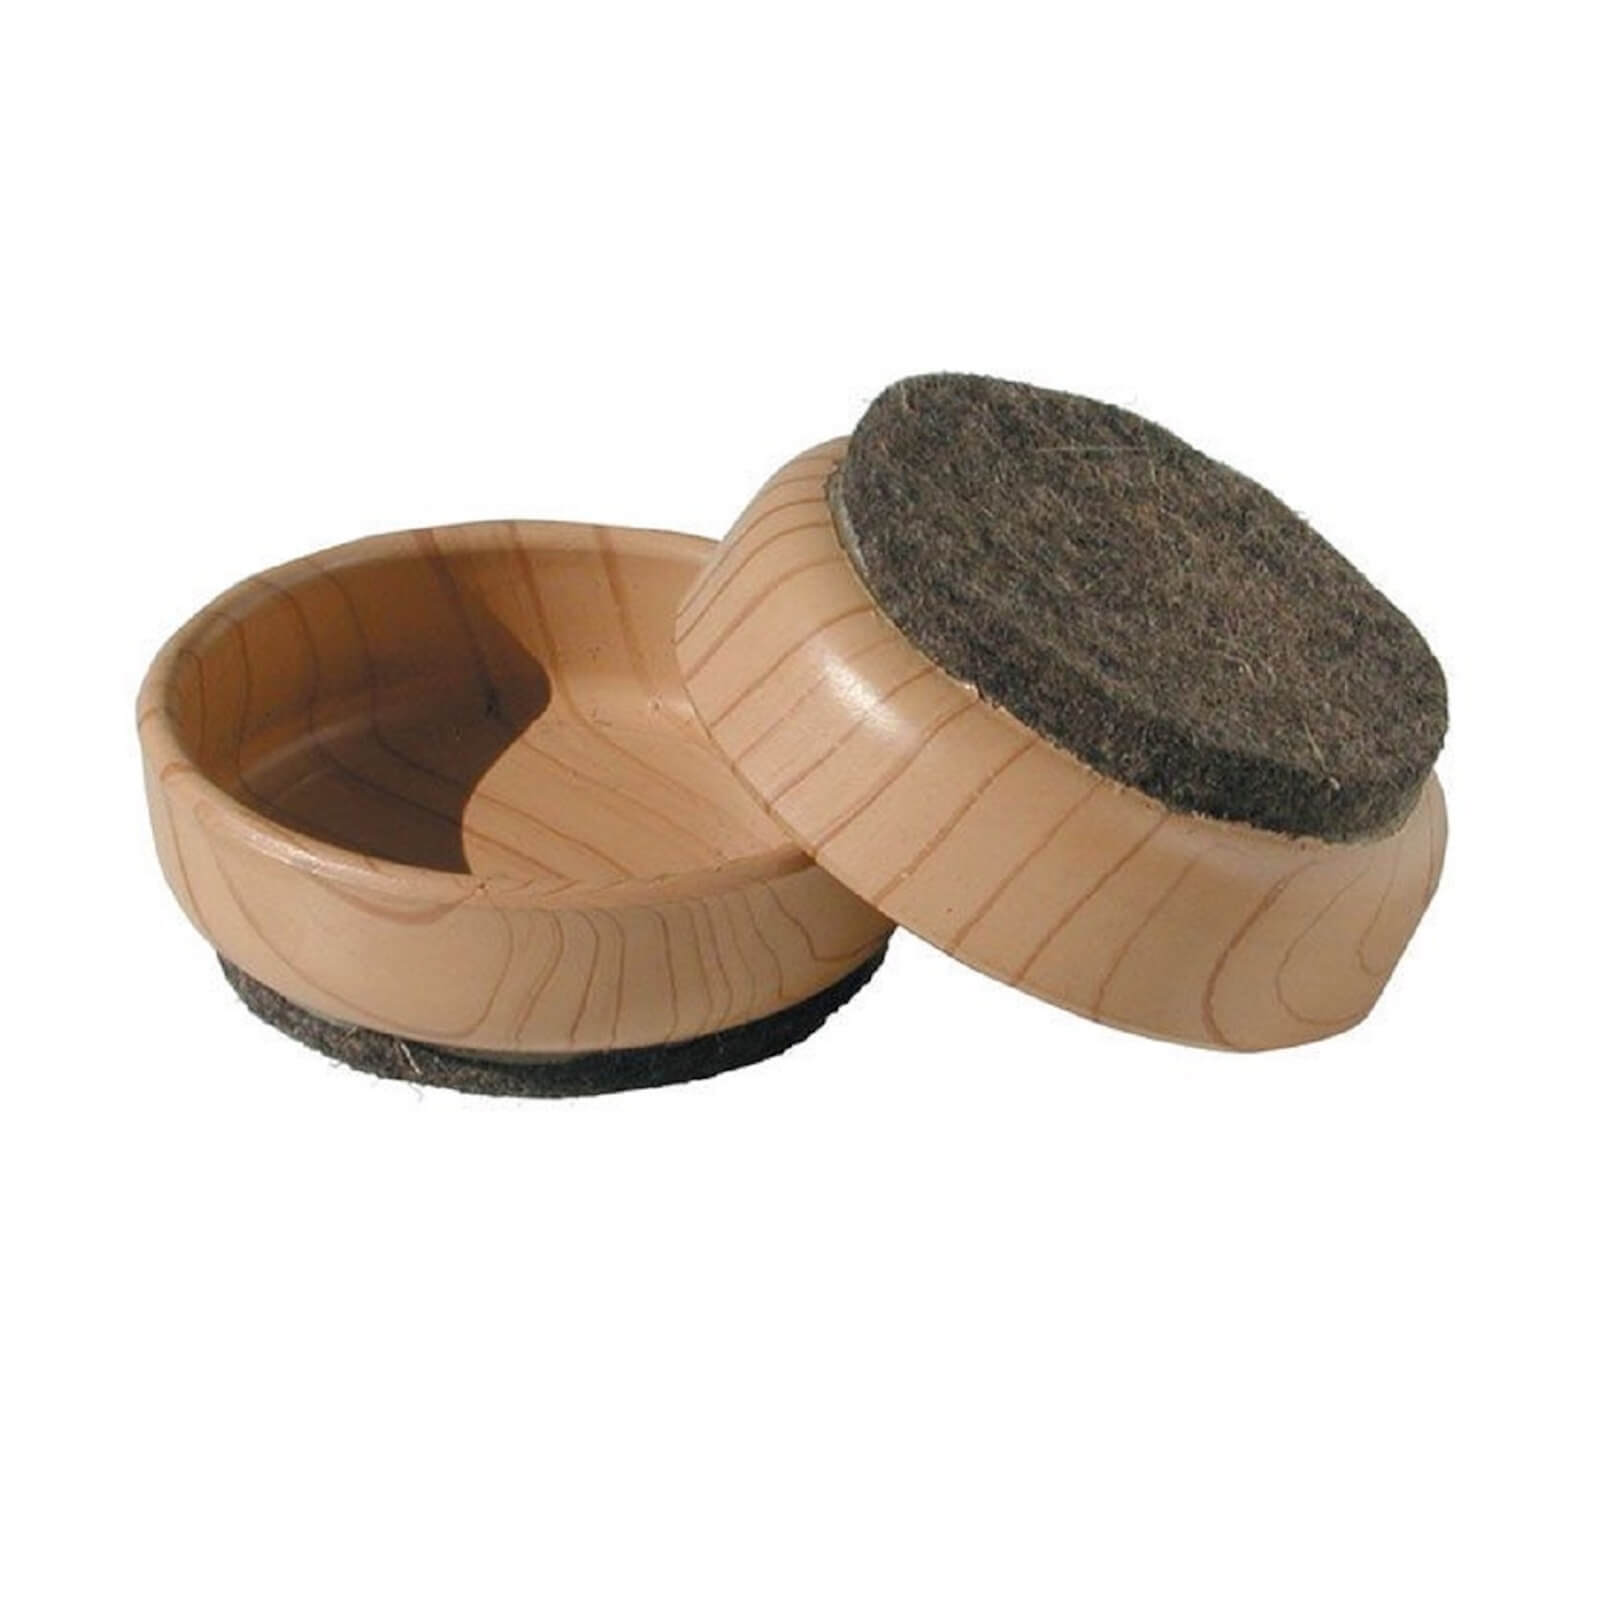 Castor Cups for wood and hard floors - Pack of 4 - 60mm